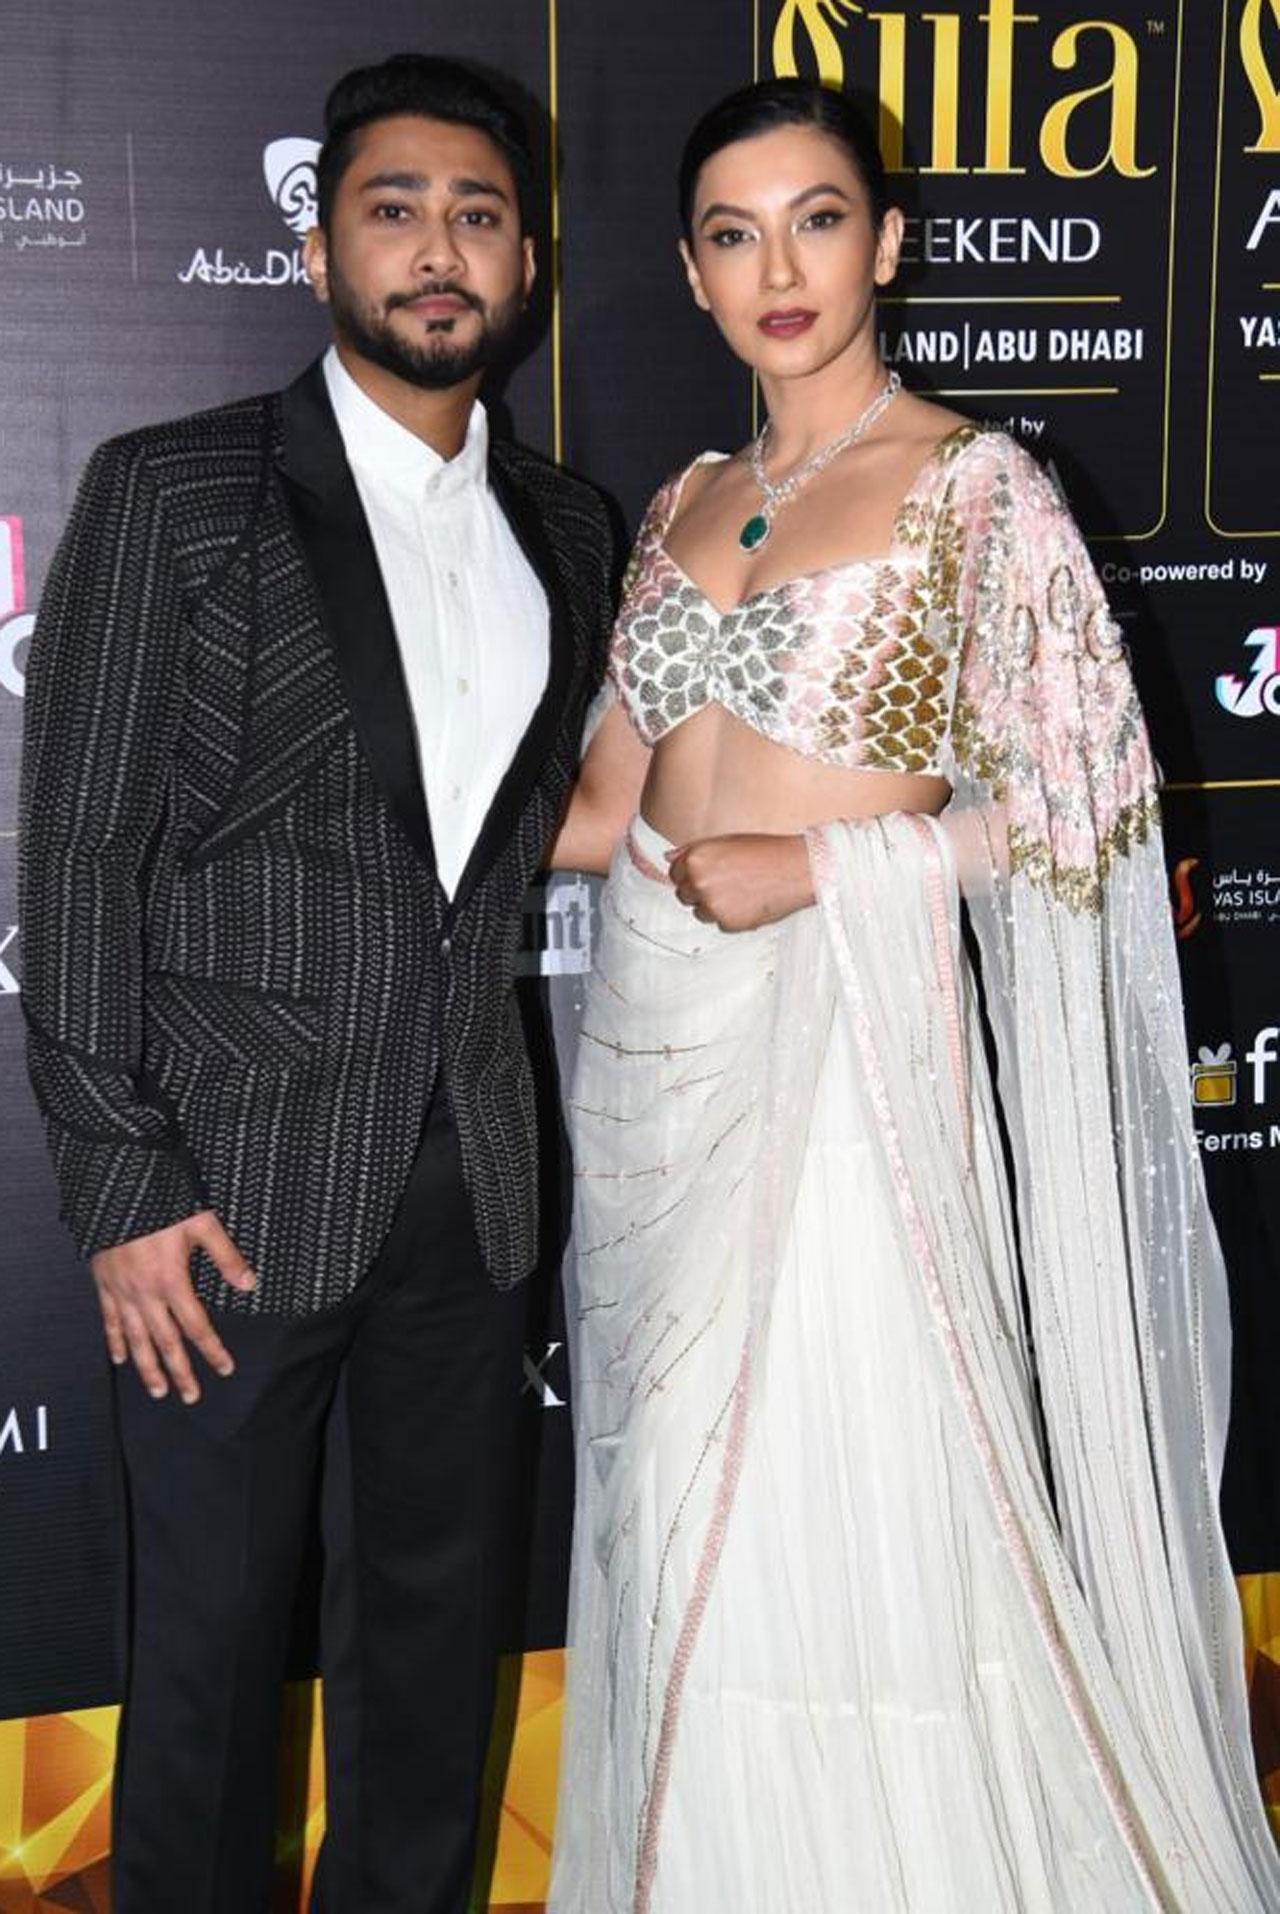 Gauahar Khan and Zaid Darbar looked stylish in their white and black outfits at the green carpet. The tied the knot on December 25, 2020 in a private ceremony